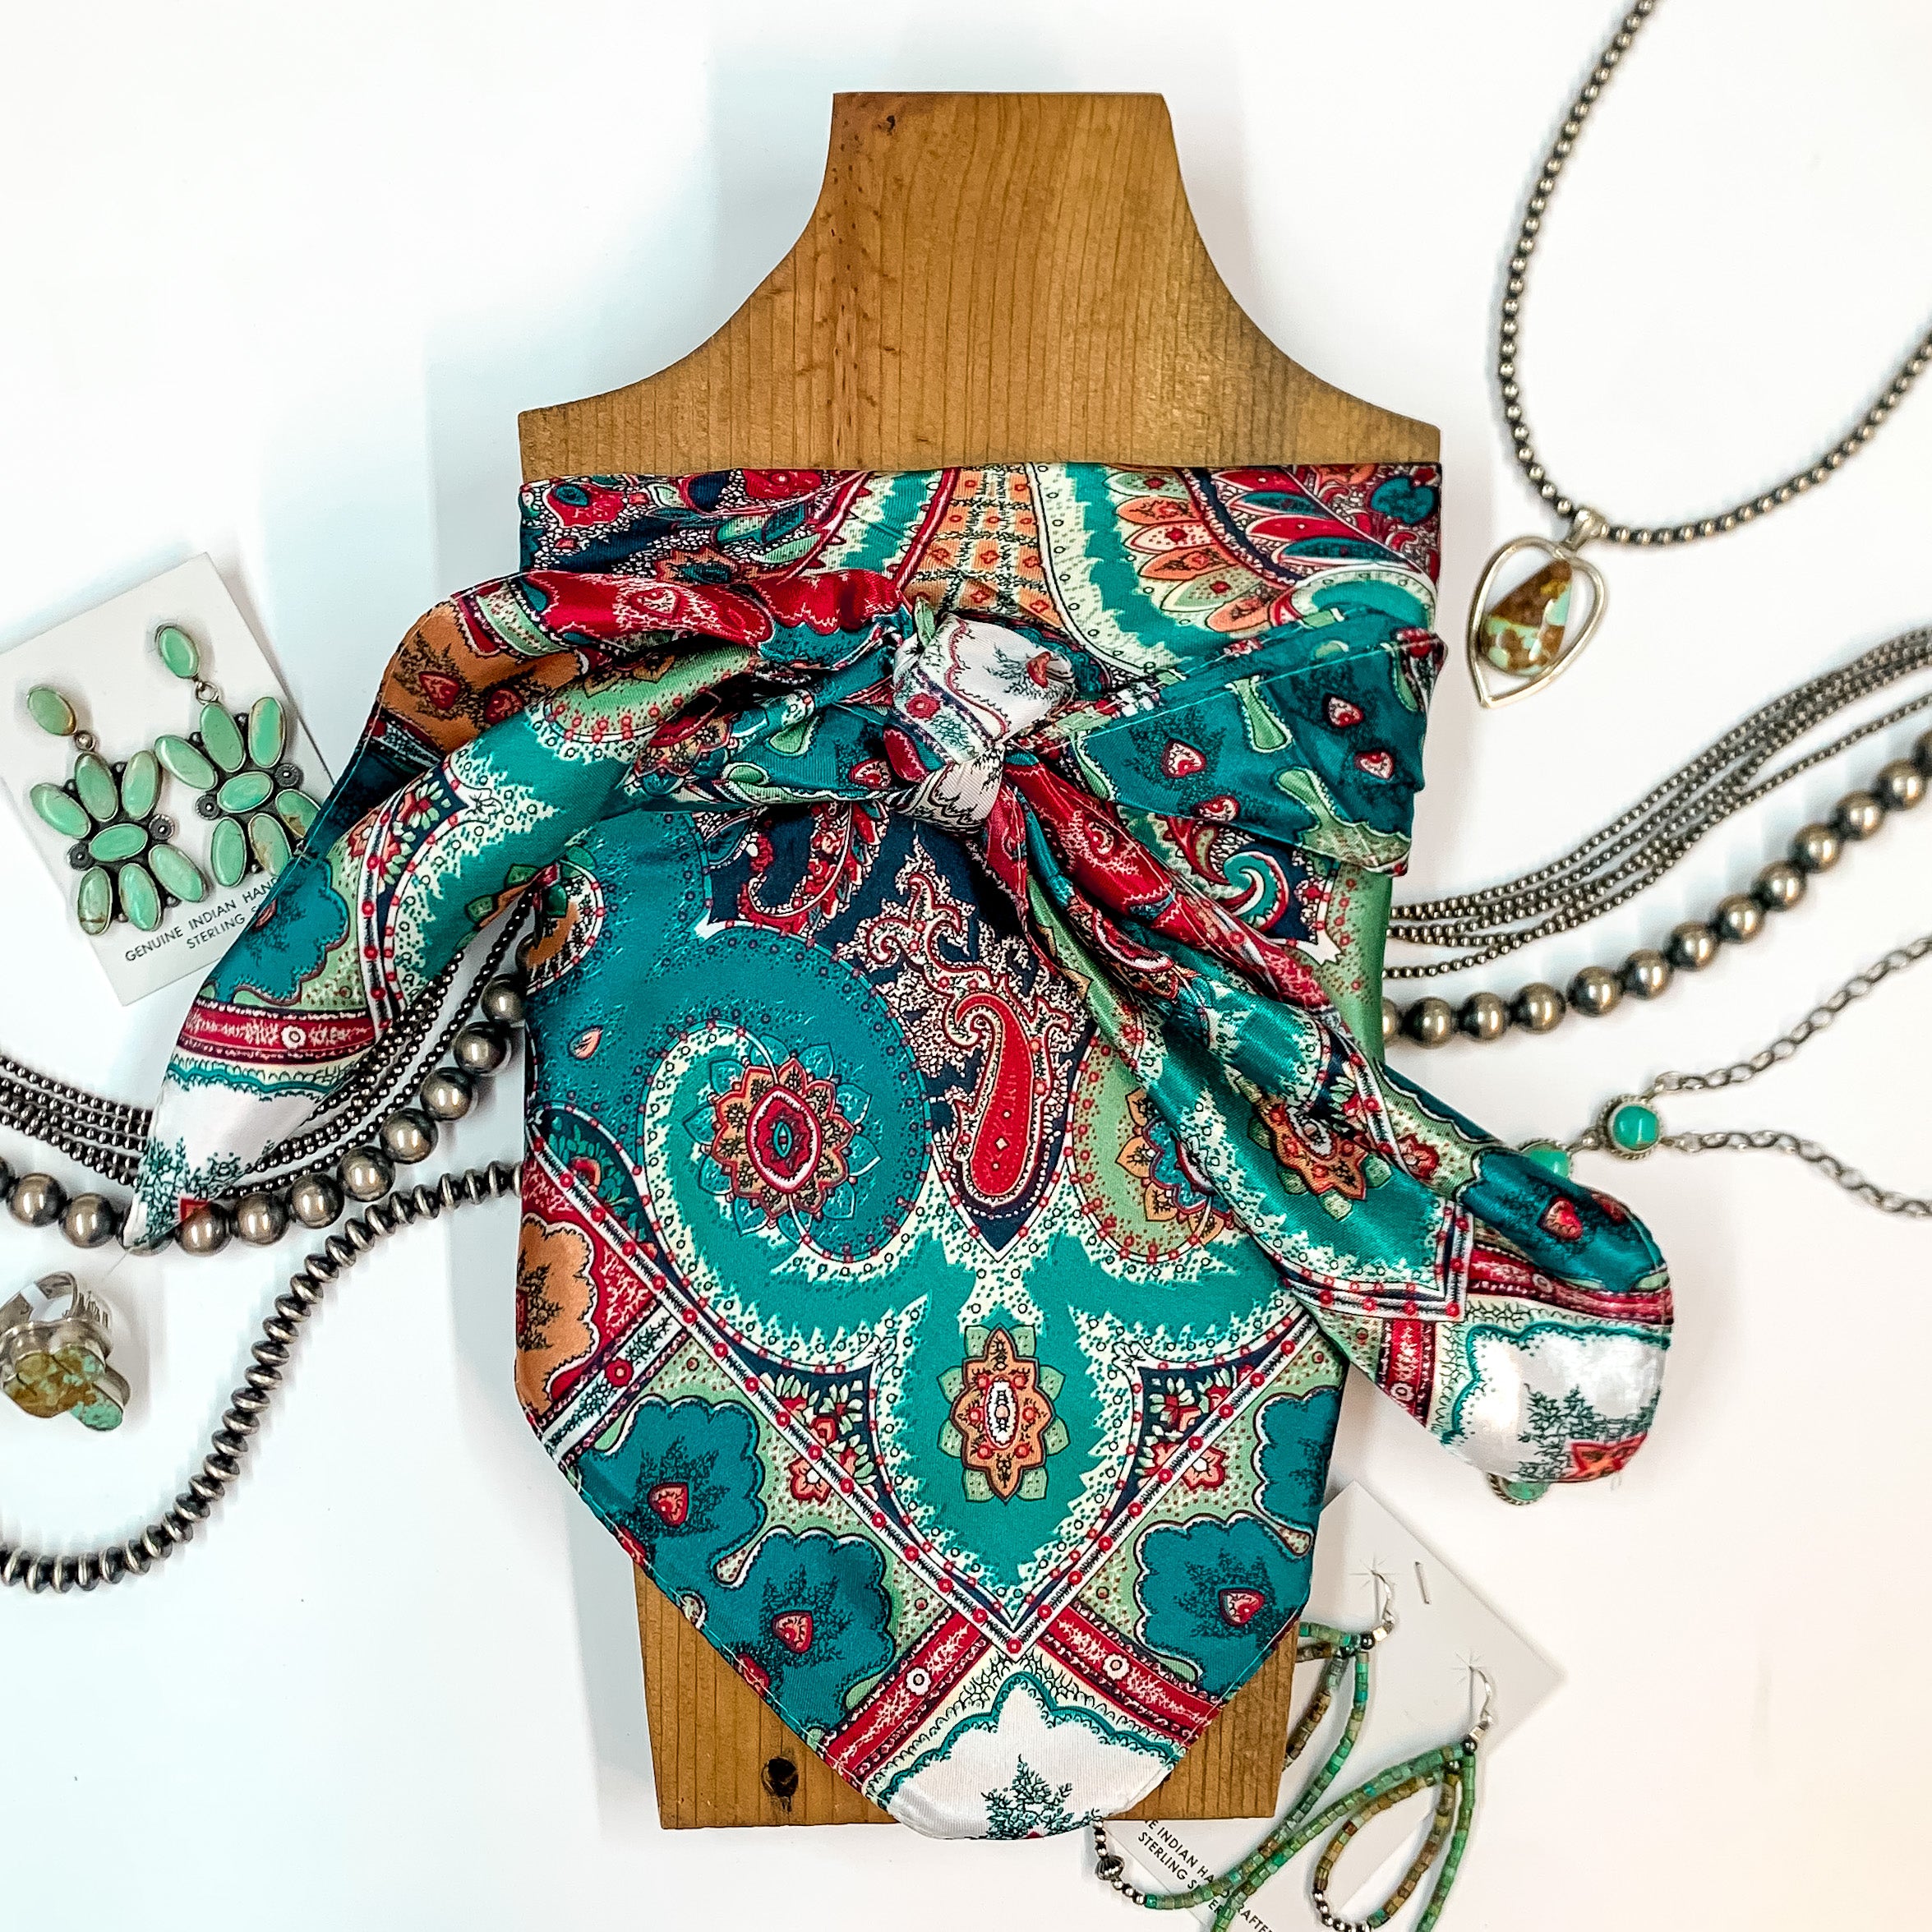 Patterned scarf in Sheridan. Scarf is tied around a wooden piece. The scarf and piece of wood is pictured on a white background with Navajo jewelry spread out around it.